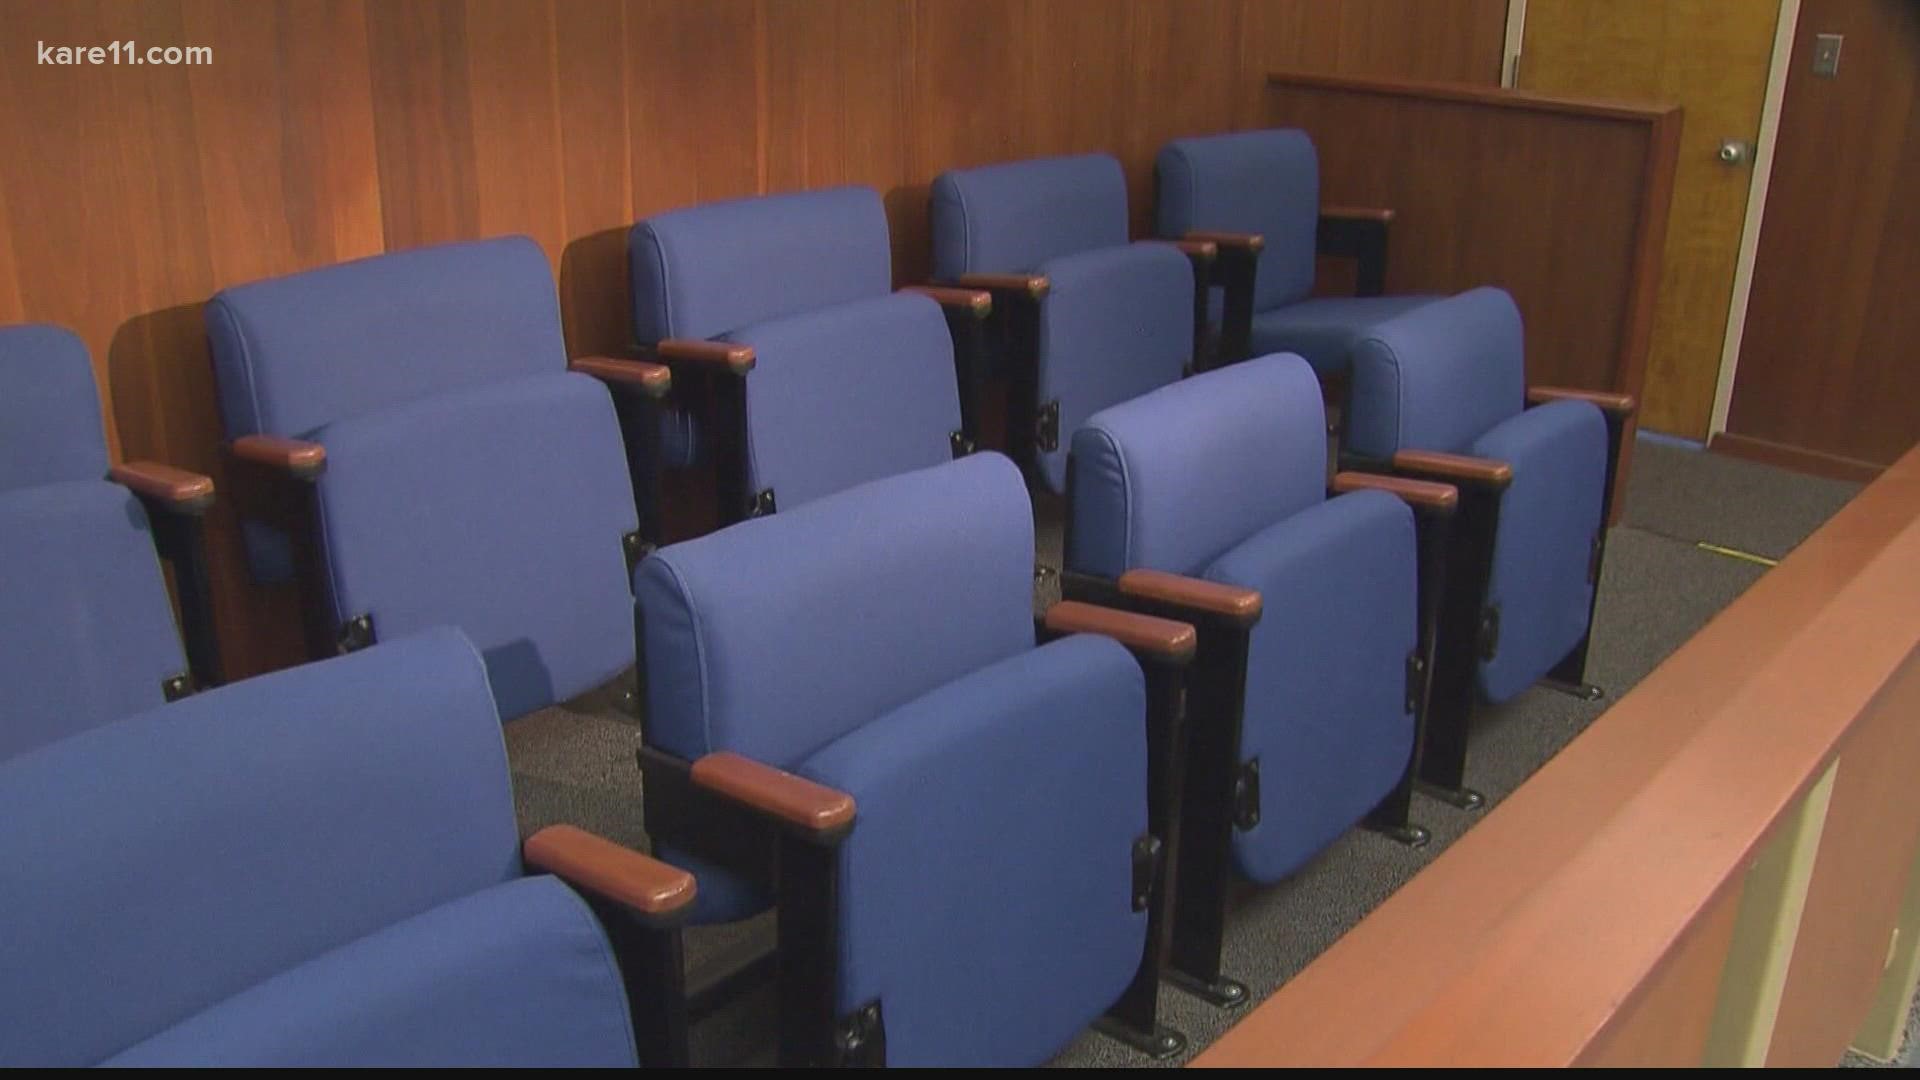 Jurors will begin their second day of deliberations, attempting to forge a verdict in the trial of the former officer who fatally shot Daunte Wright.